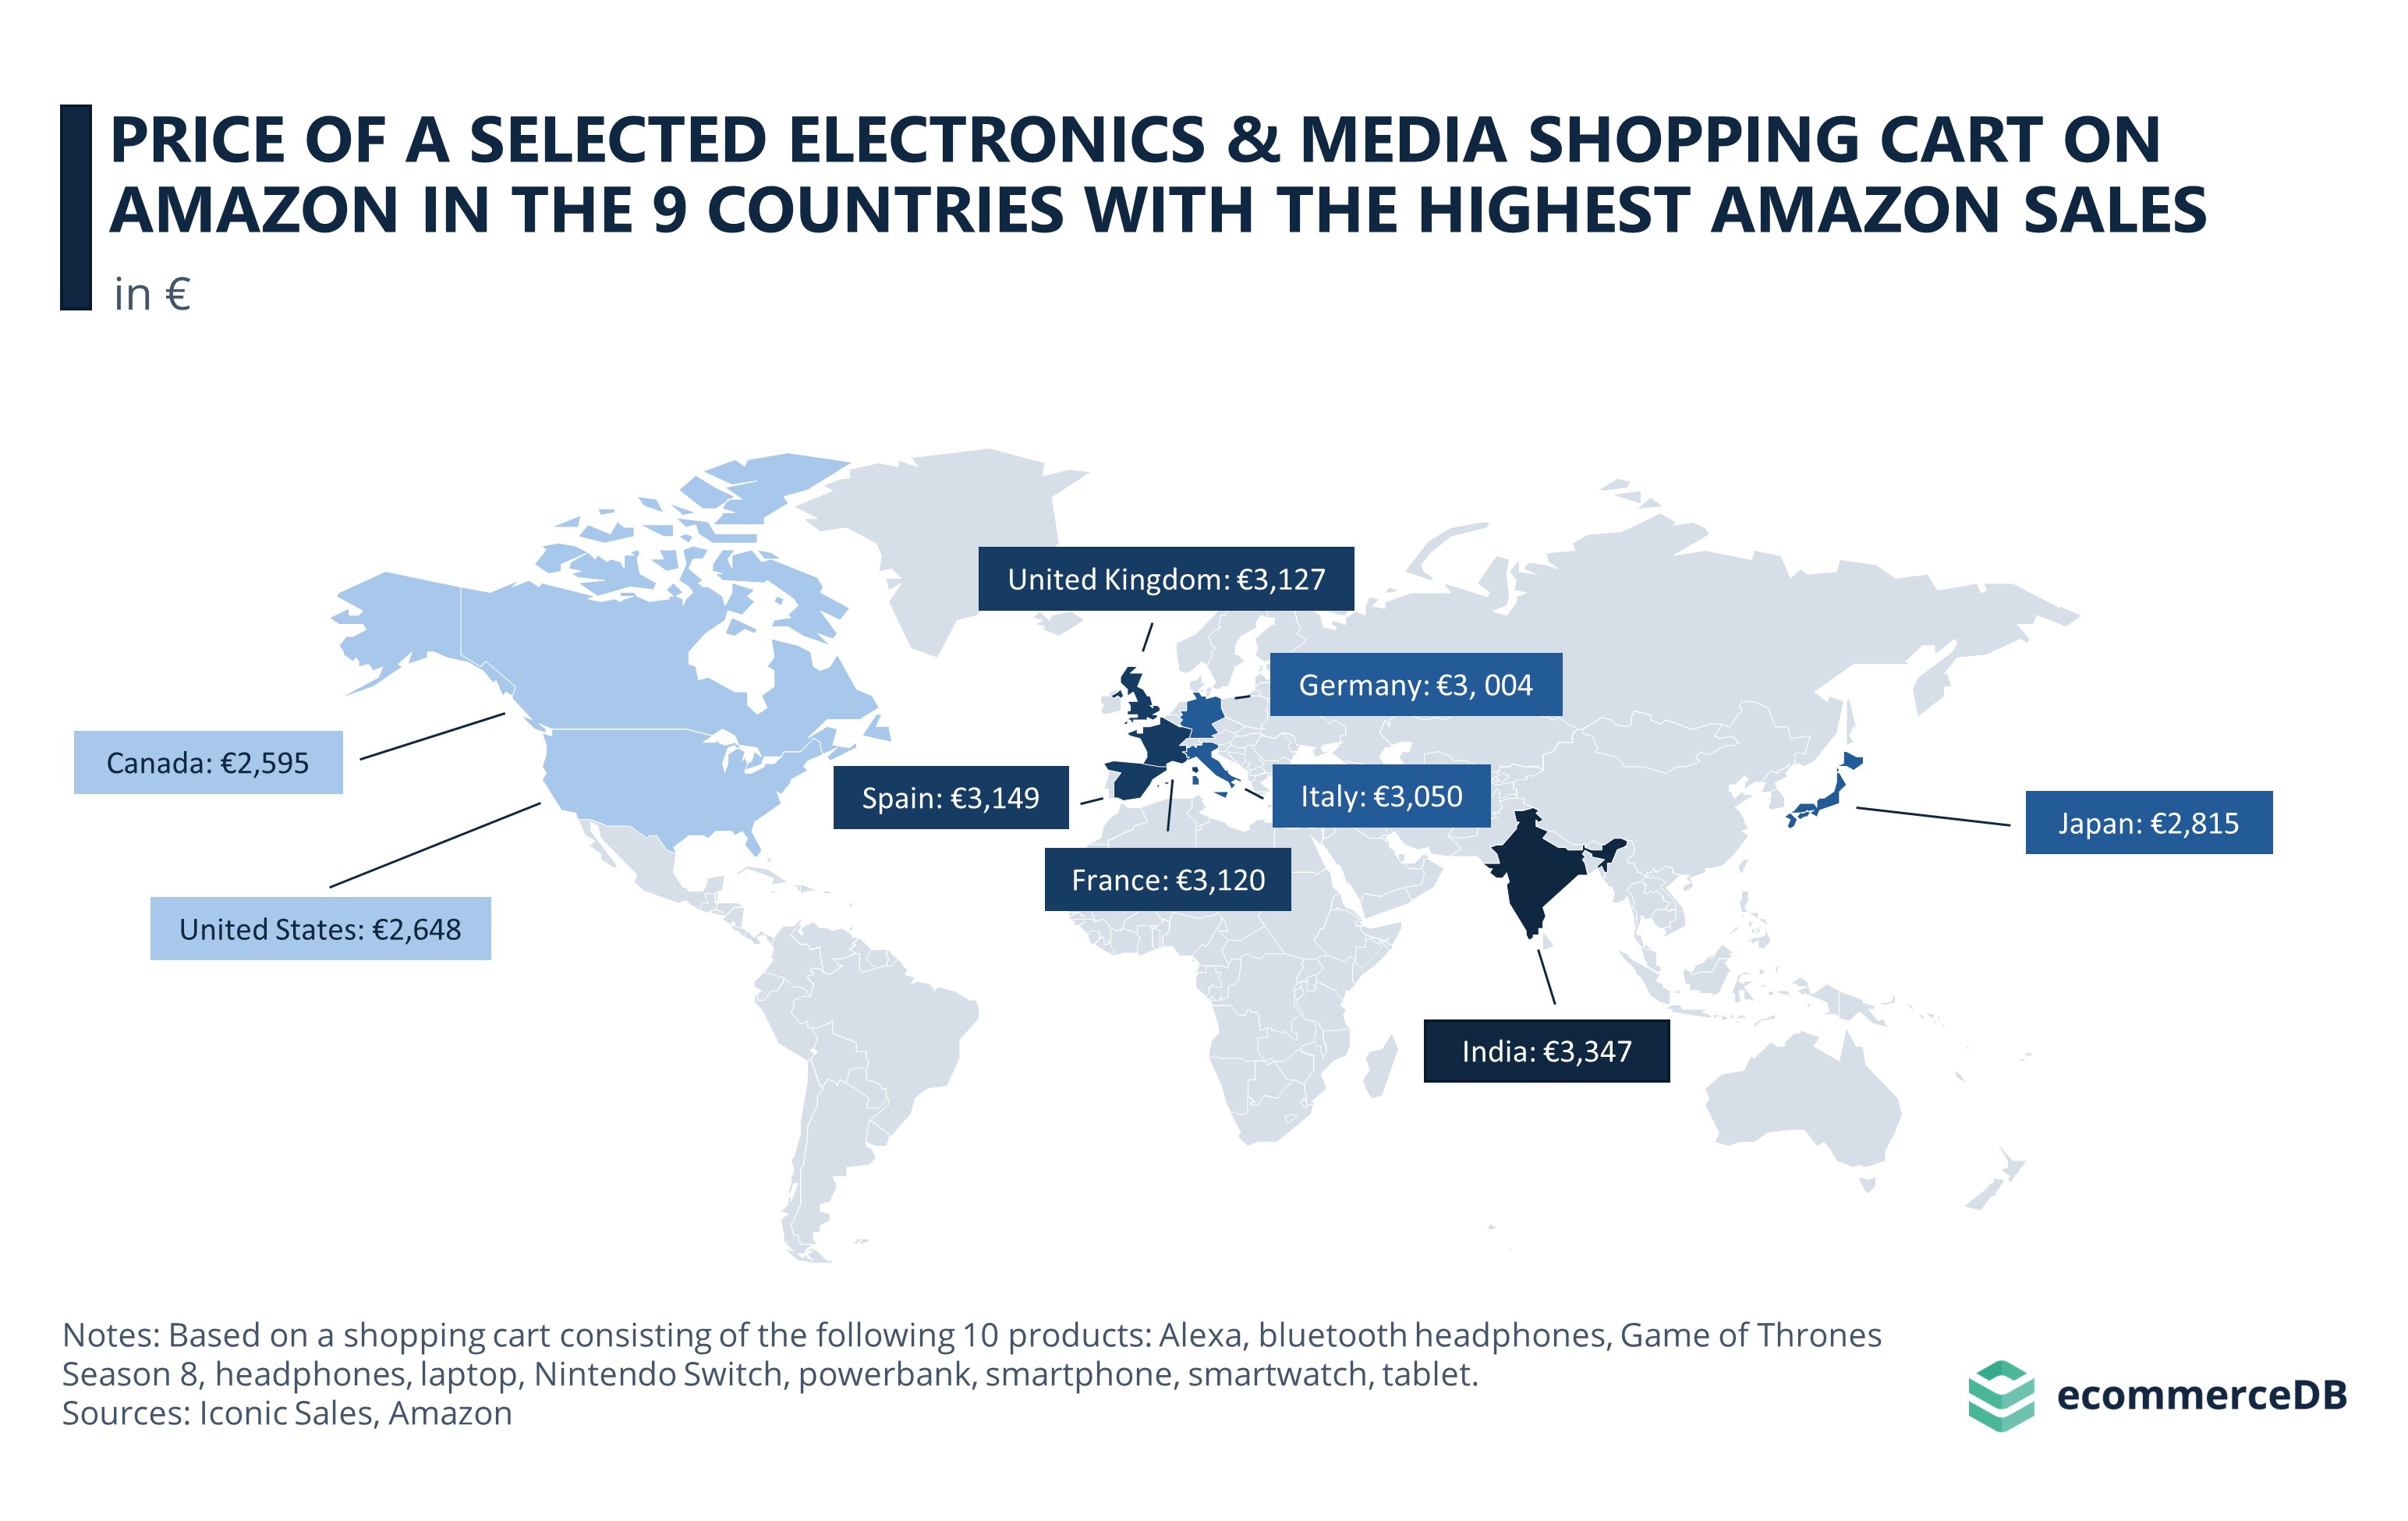 Price of a Selected Electronics & Media Shopping Cart on Amazon in the 9 Countries with the highest Amazon Sales